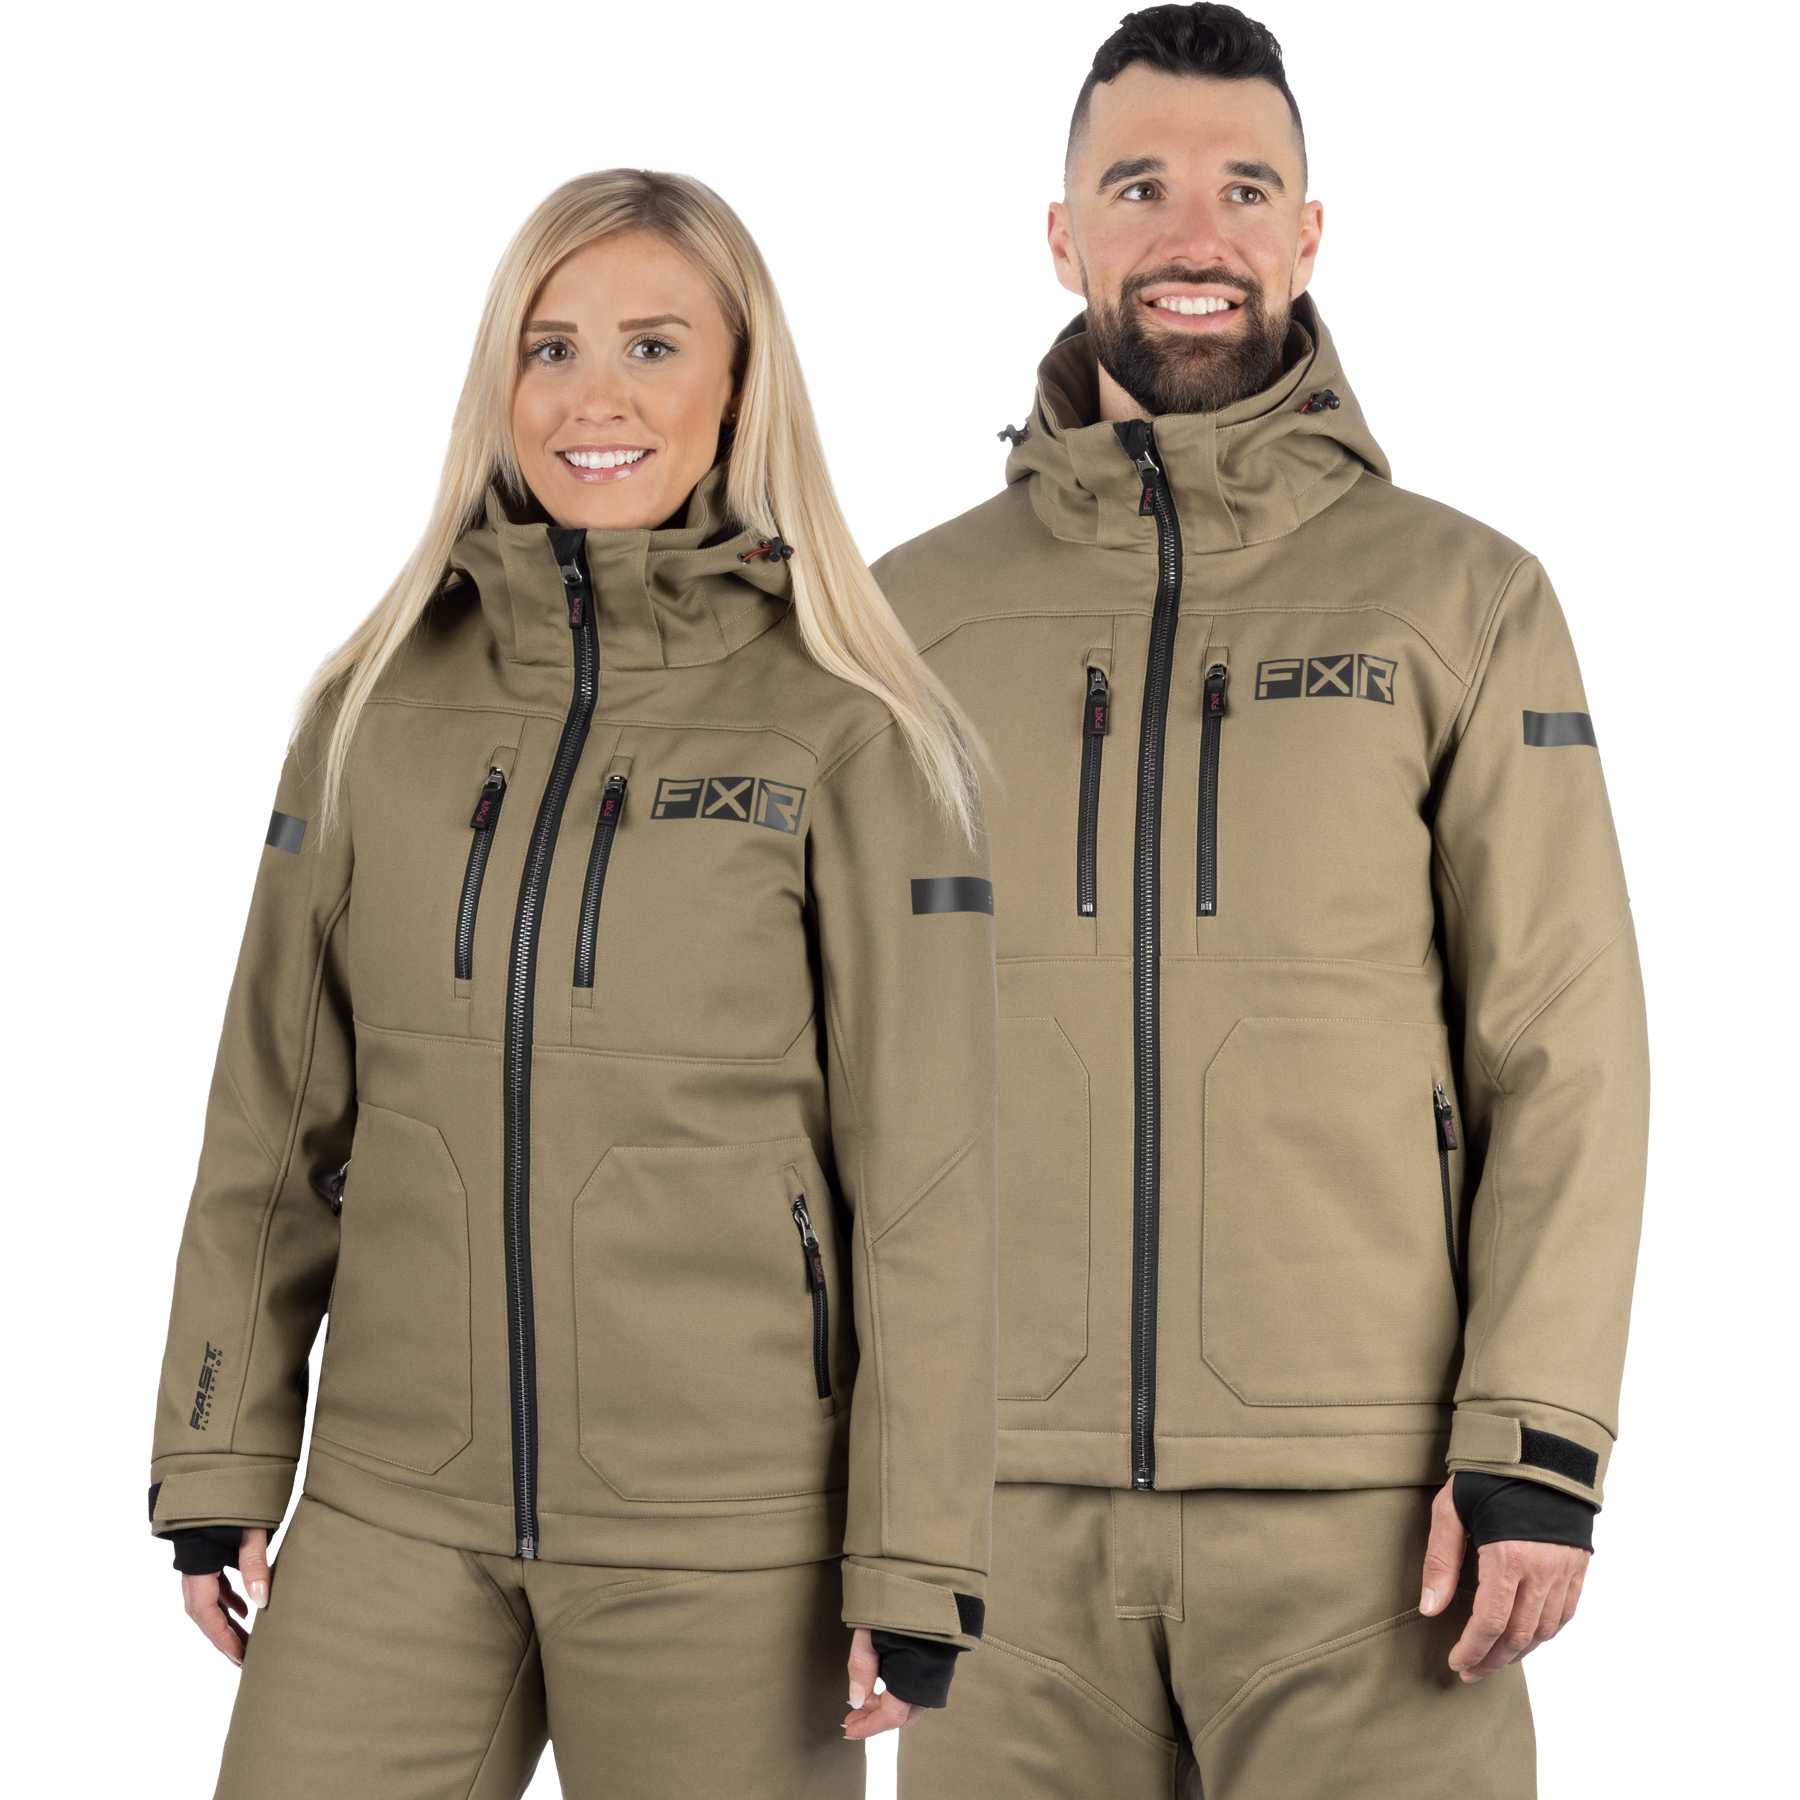 fxr racing jackets adult unisex task insulated canvas f.a.s.t. jackets - casual